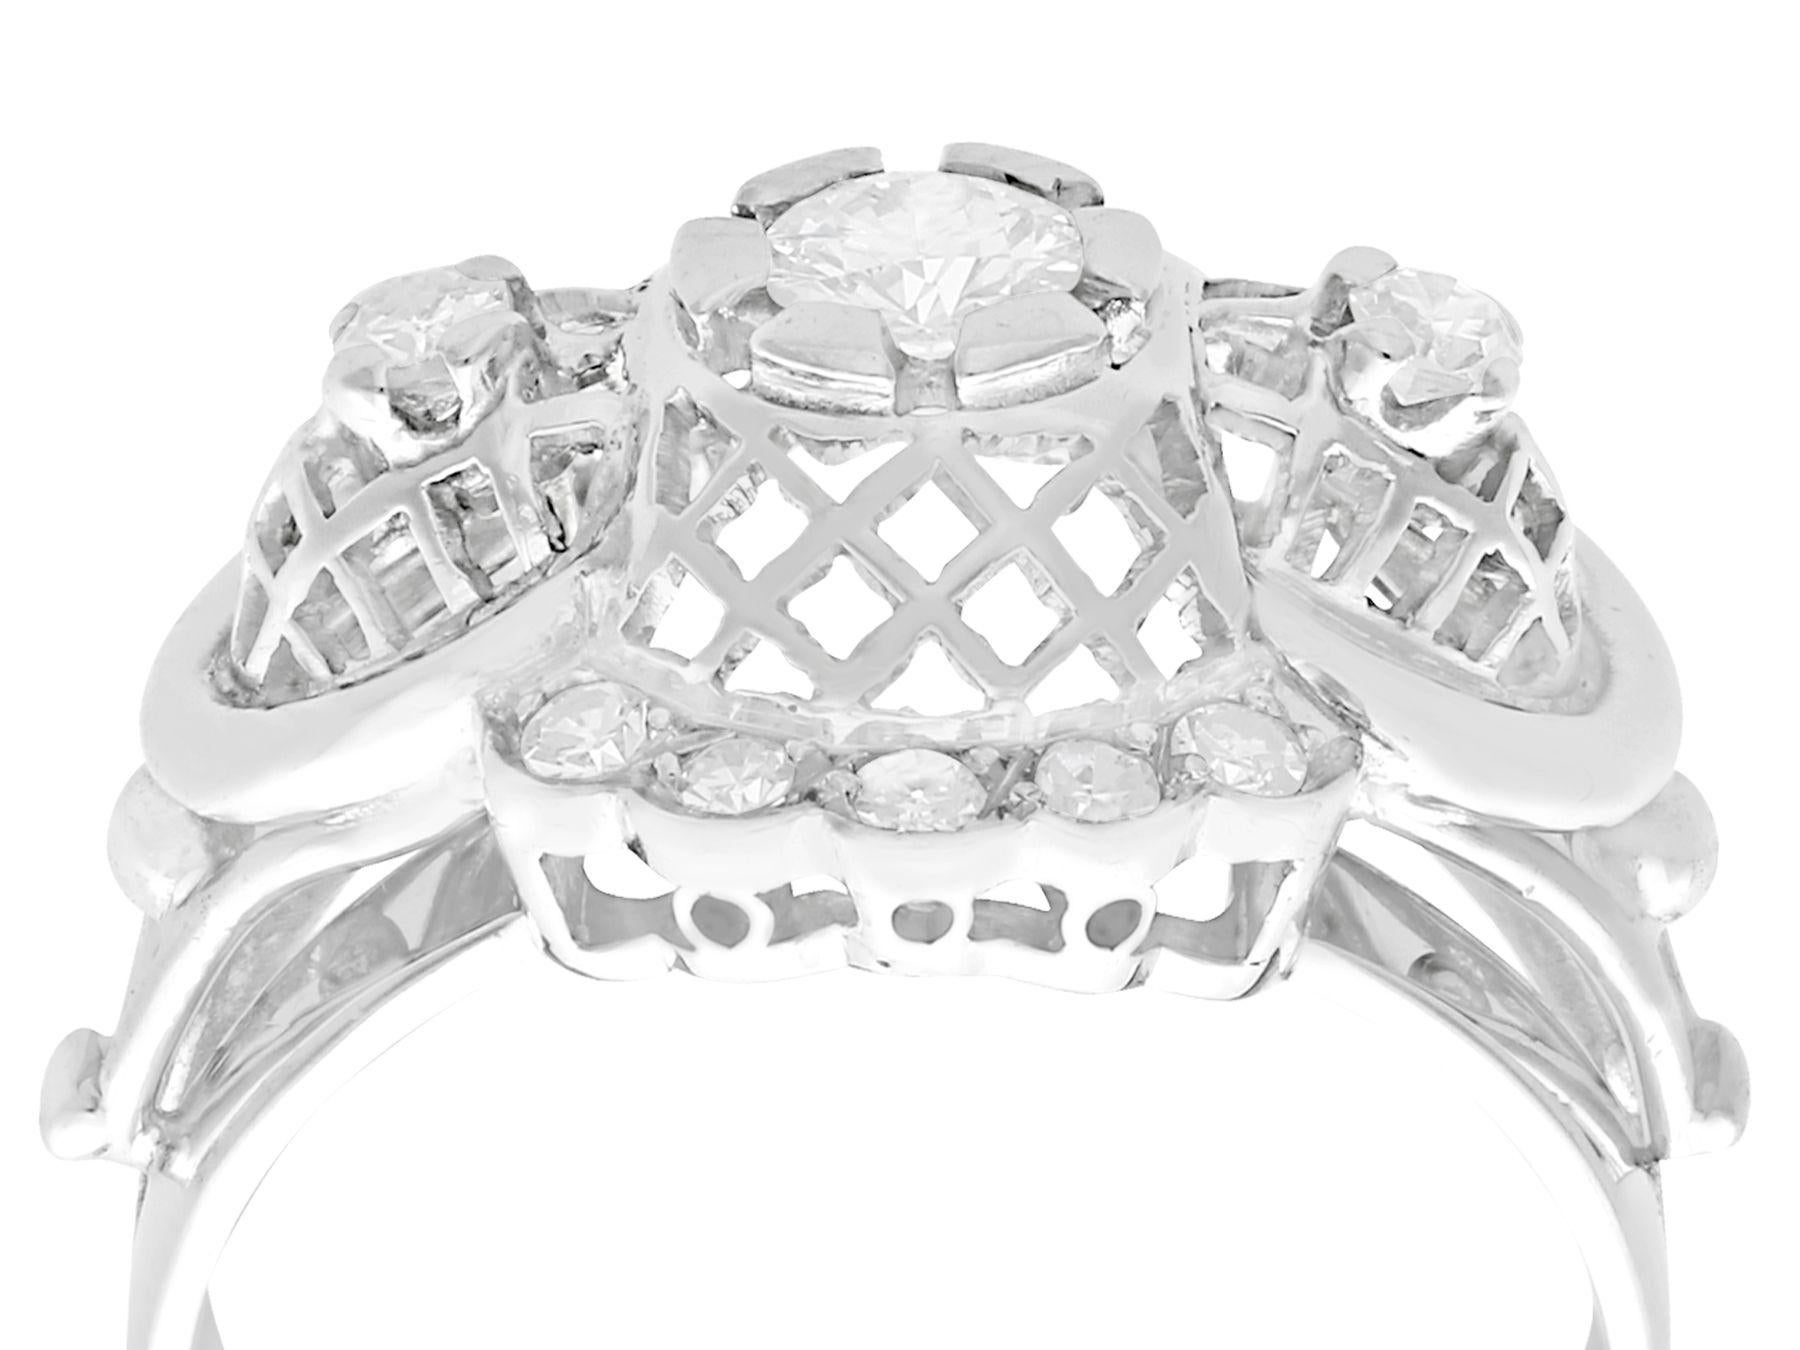 A fine and impressive vintage 0.49 carat diamond and 18 karat white gold cocktail ring; part of our diverse vintage jewelry and estate jewelry collections.

This fine and impressive cocktail ring has been crafted in 18k white gold.

The substantial,